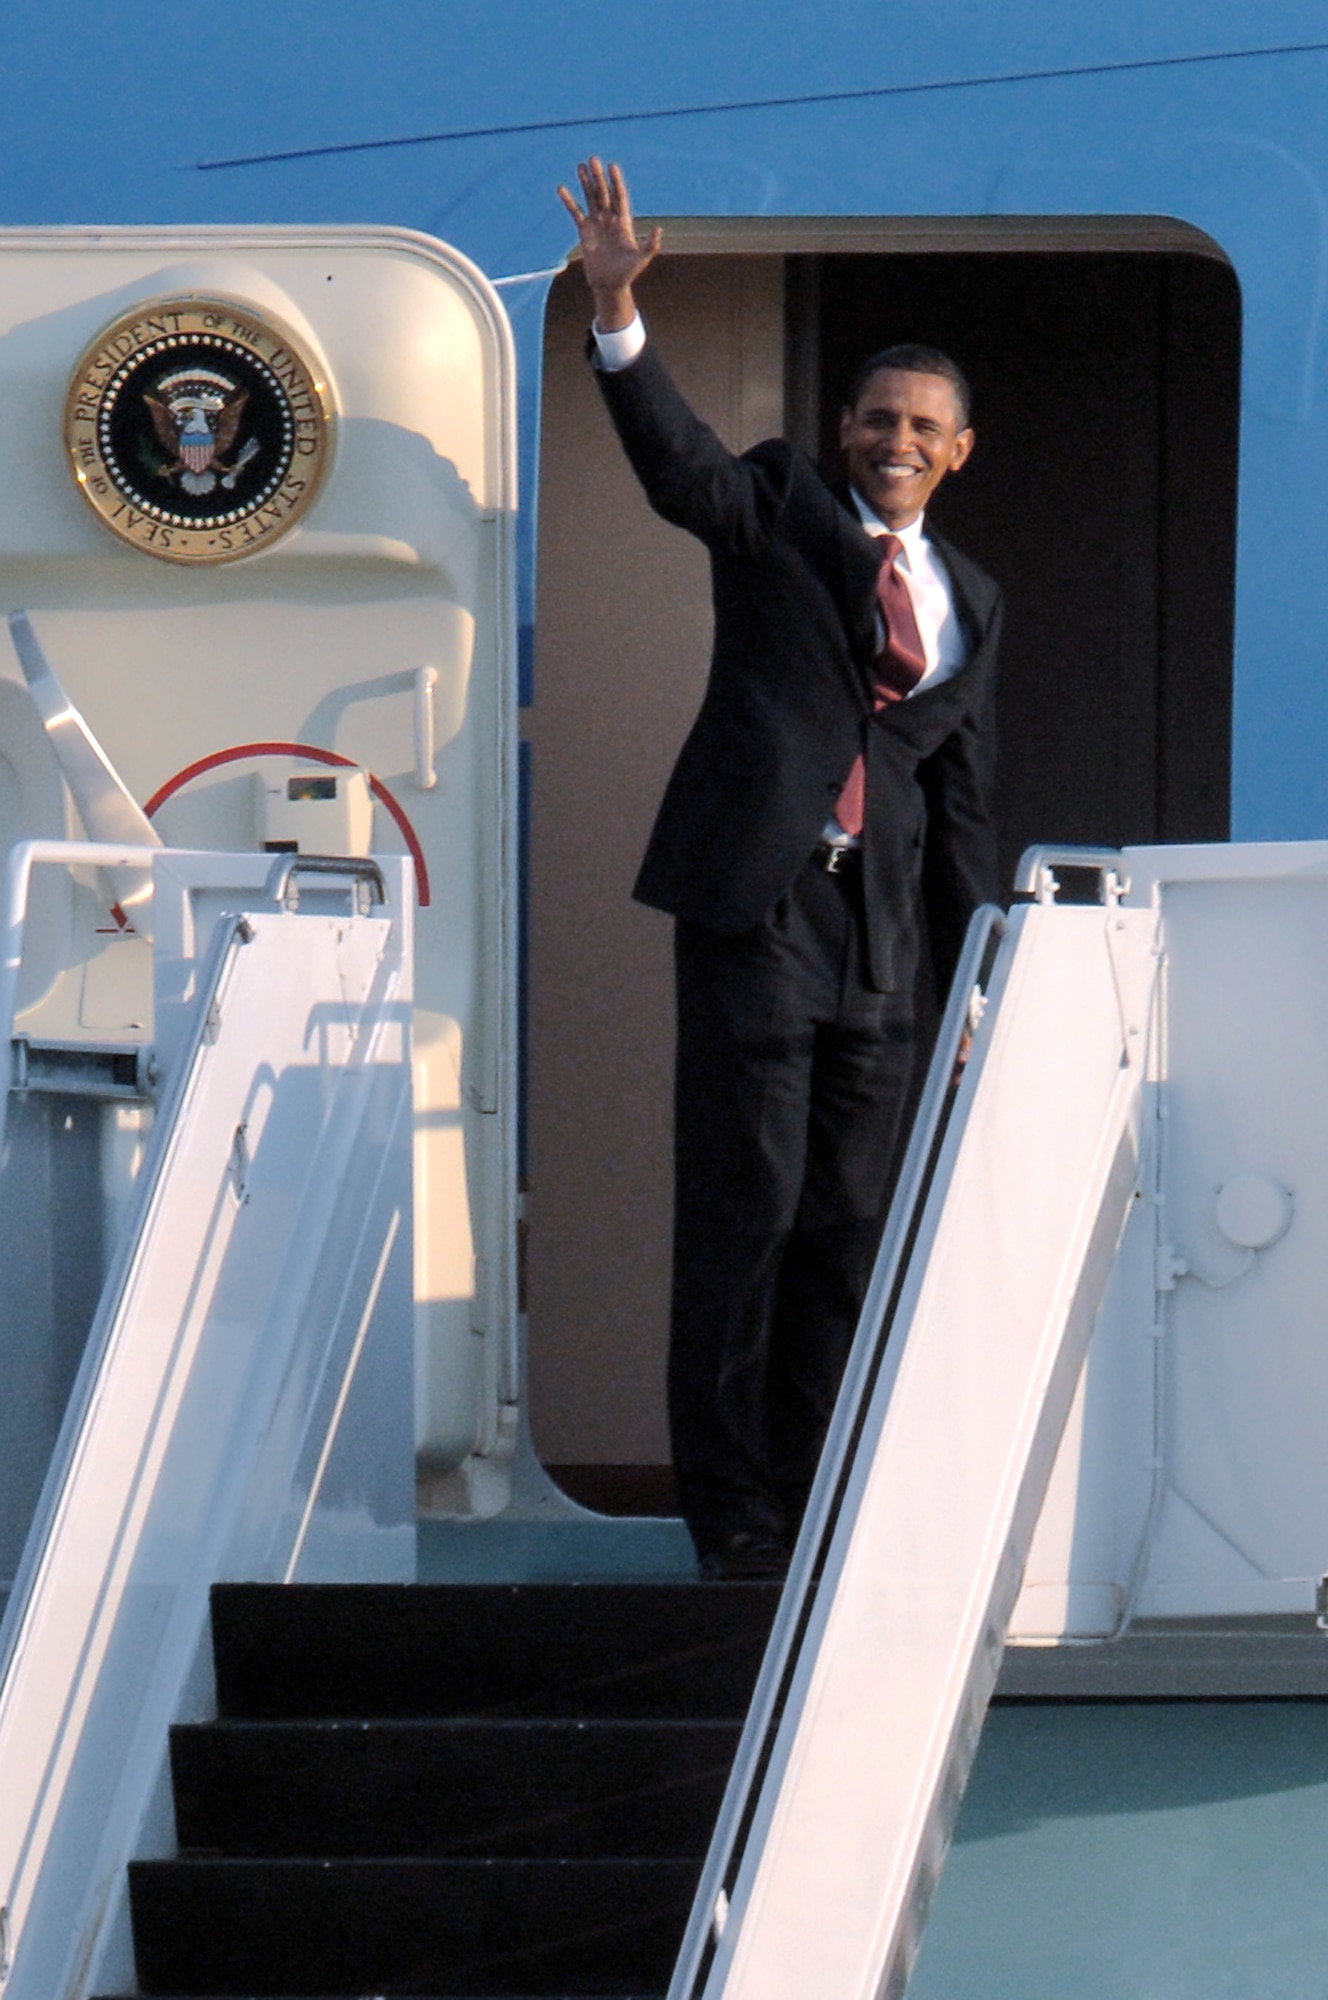 President Barack Obama waves to the crowd June 5 from Air Force One at Ramstein Air Base, Germany. He was visiting wounded U.S. servicemembers being treated at nearby Landstuhl Regional Medical Center, Germany.  (U.S. Air Force photo/Tech. Sgt. Kenneth Bellard)